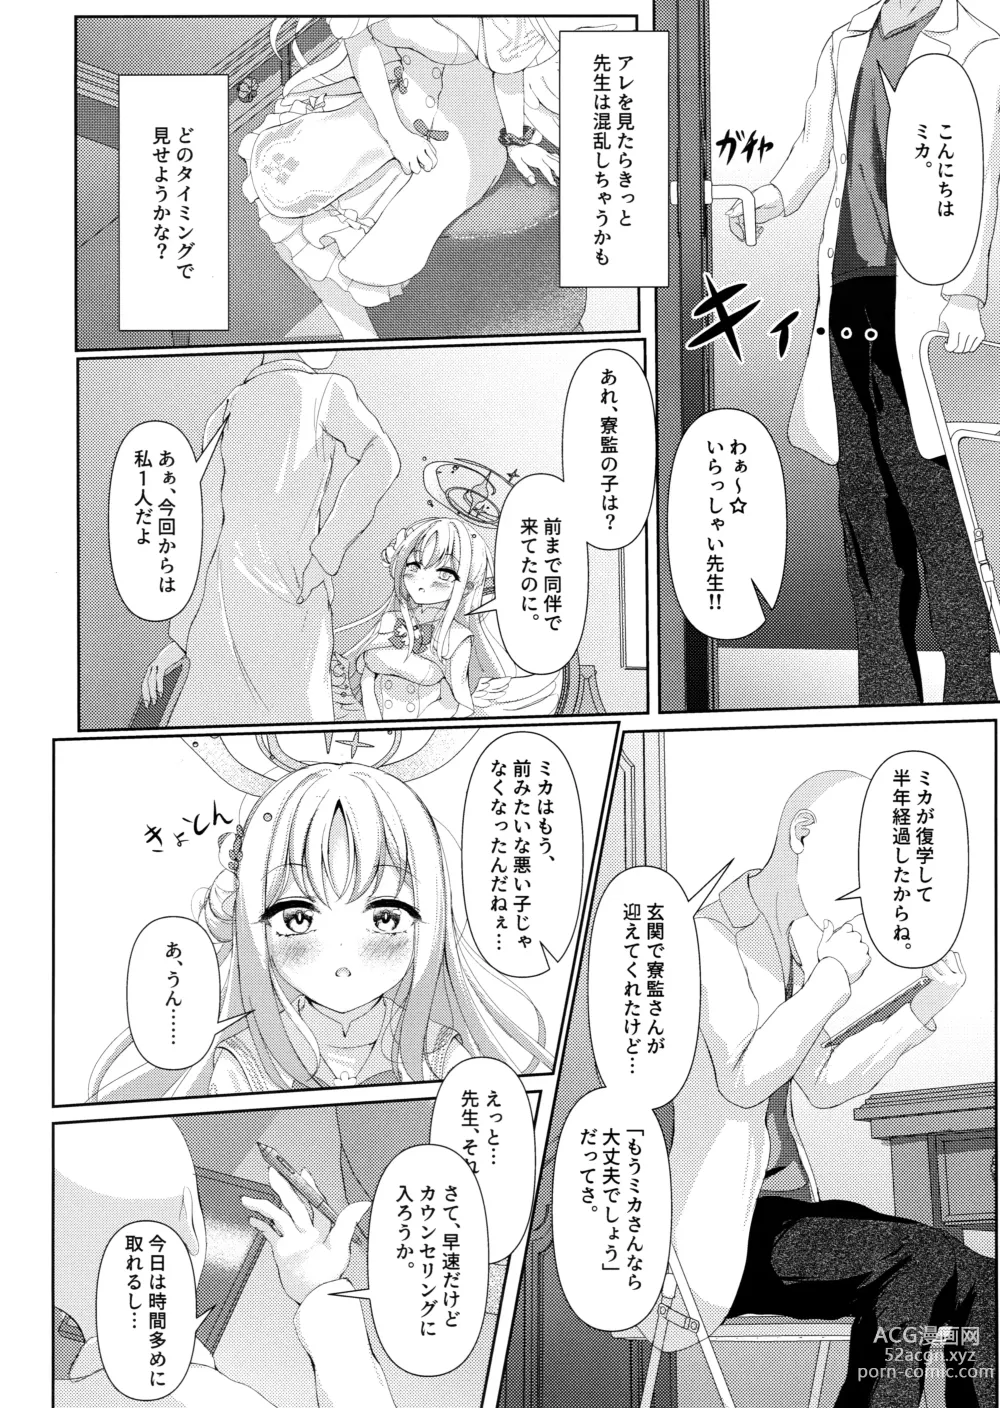 Page 3 of doujinshi Sleeping with the Dear Constellation.